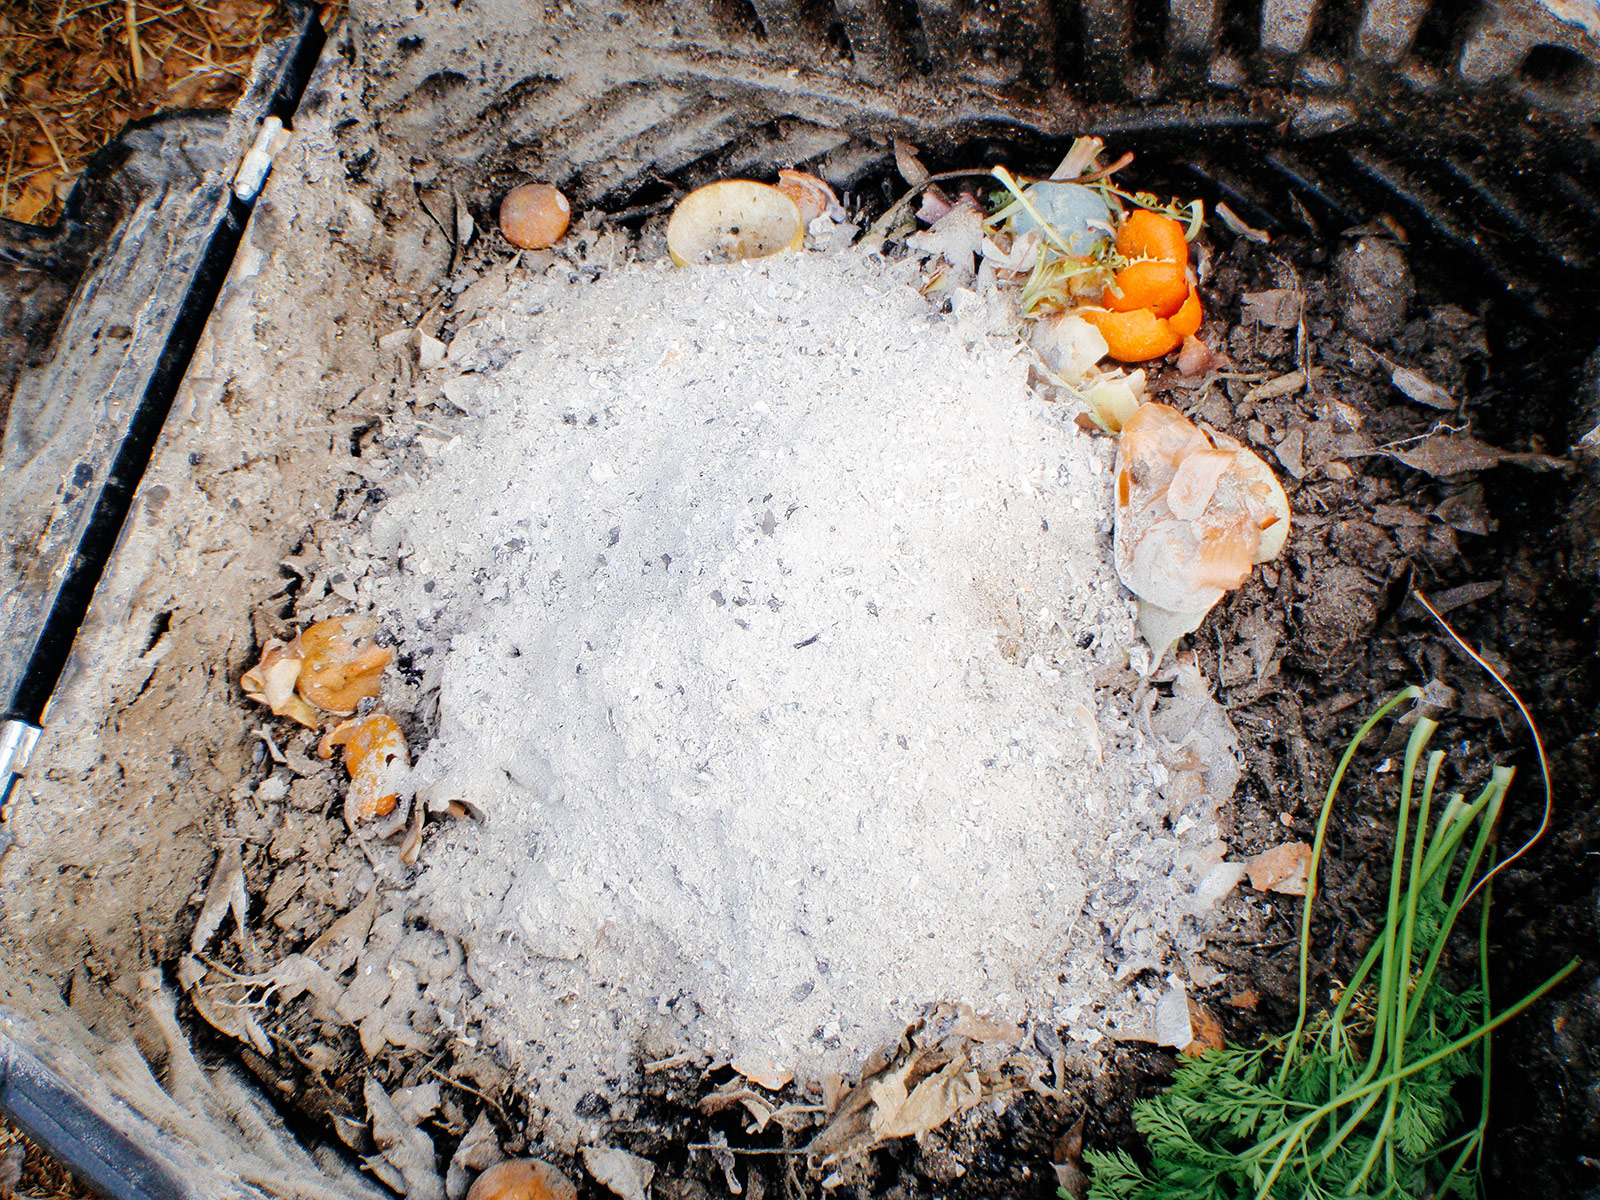 Adding wood ash to the compost heap